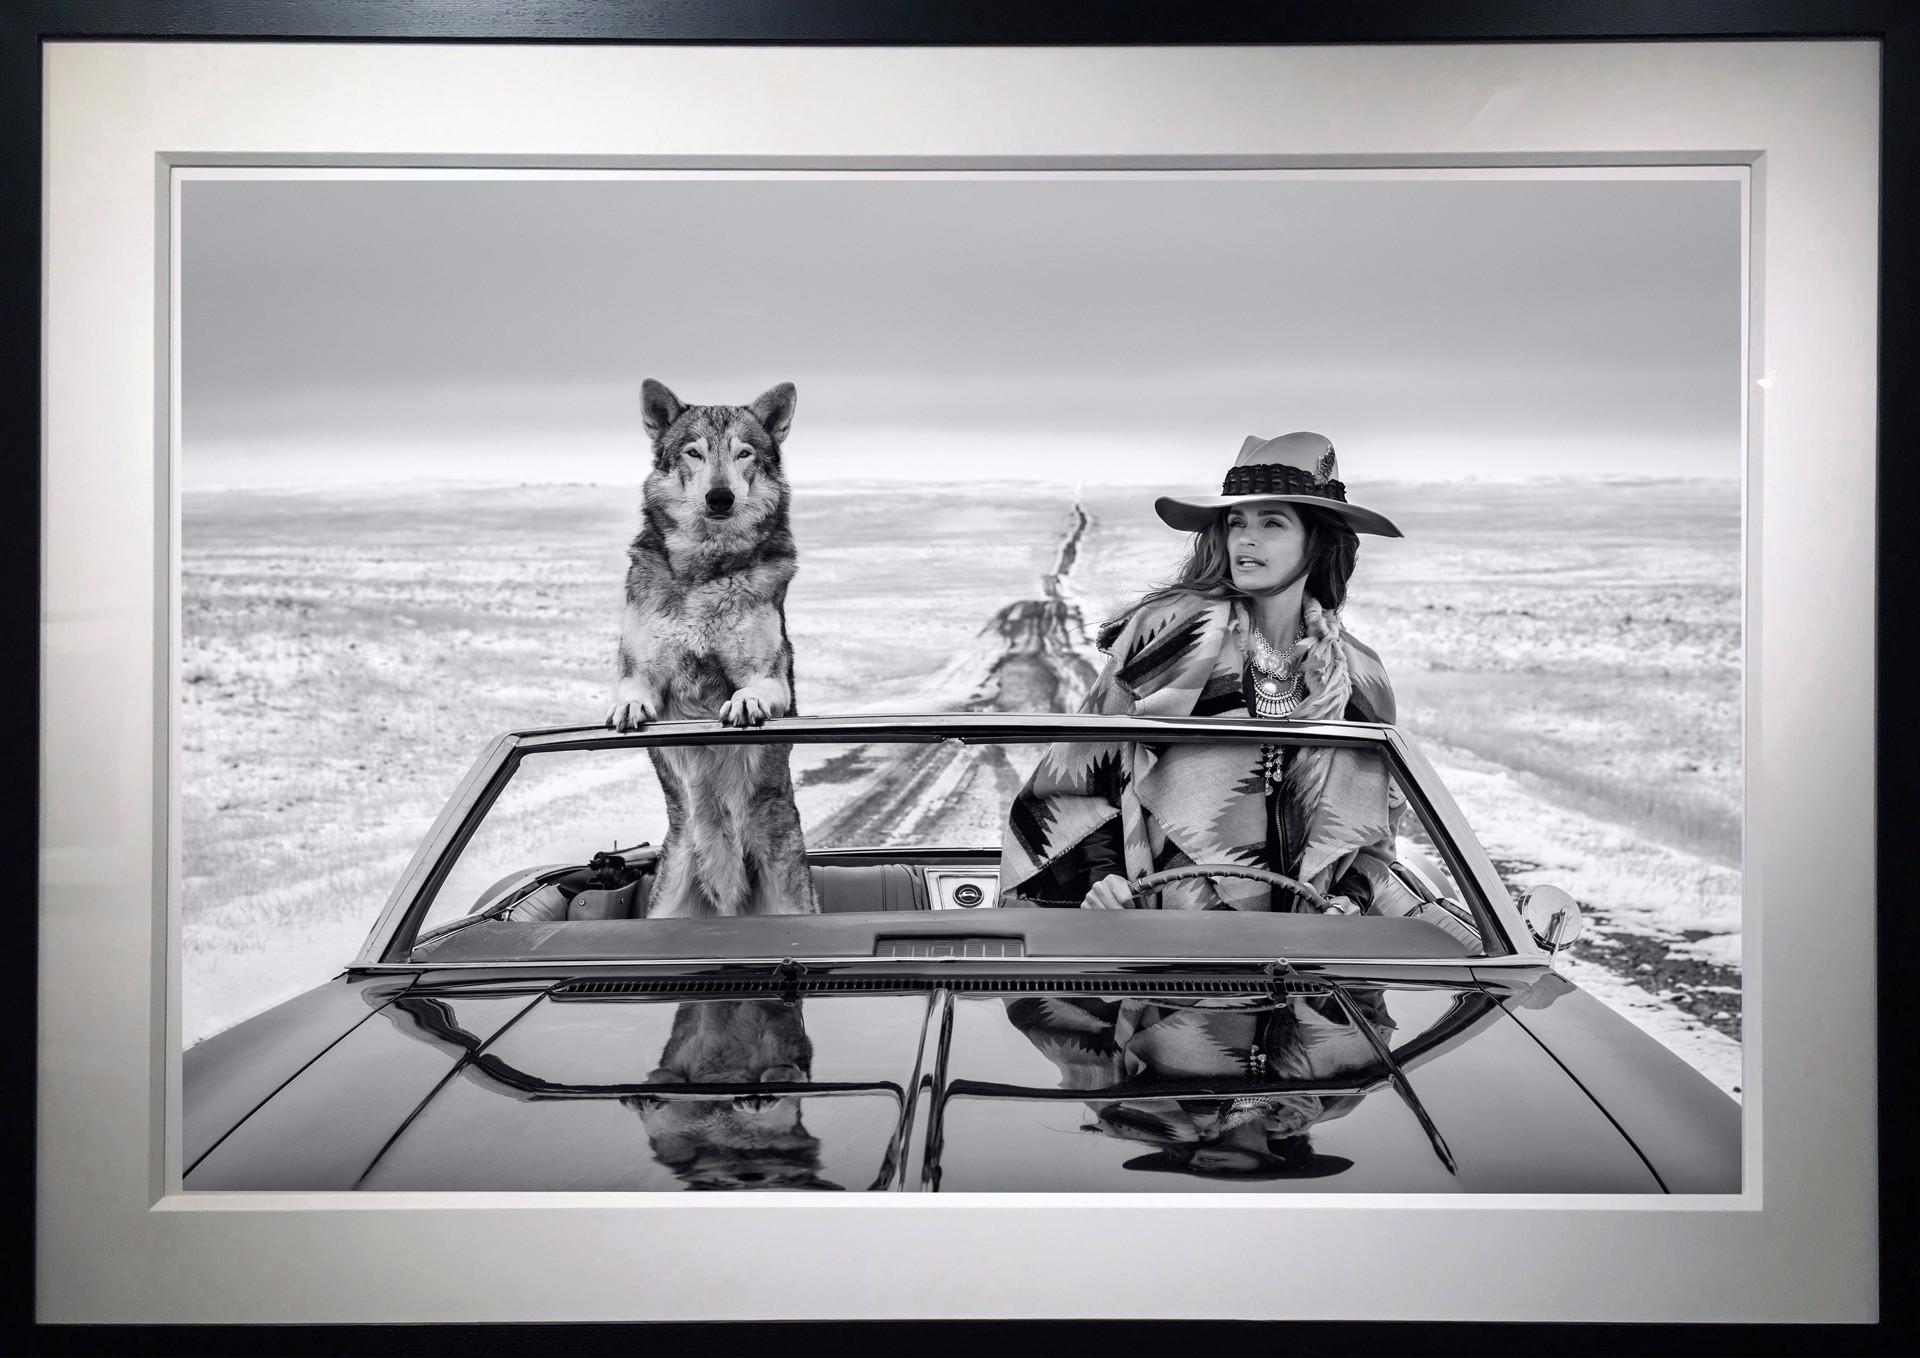 On the Road Again by David Yarrow